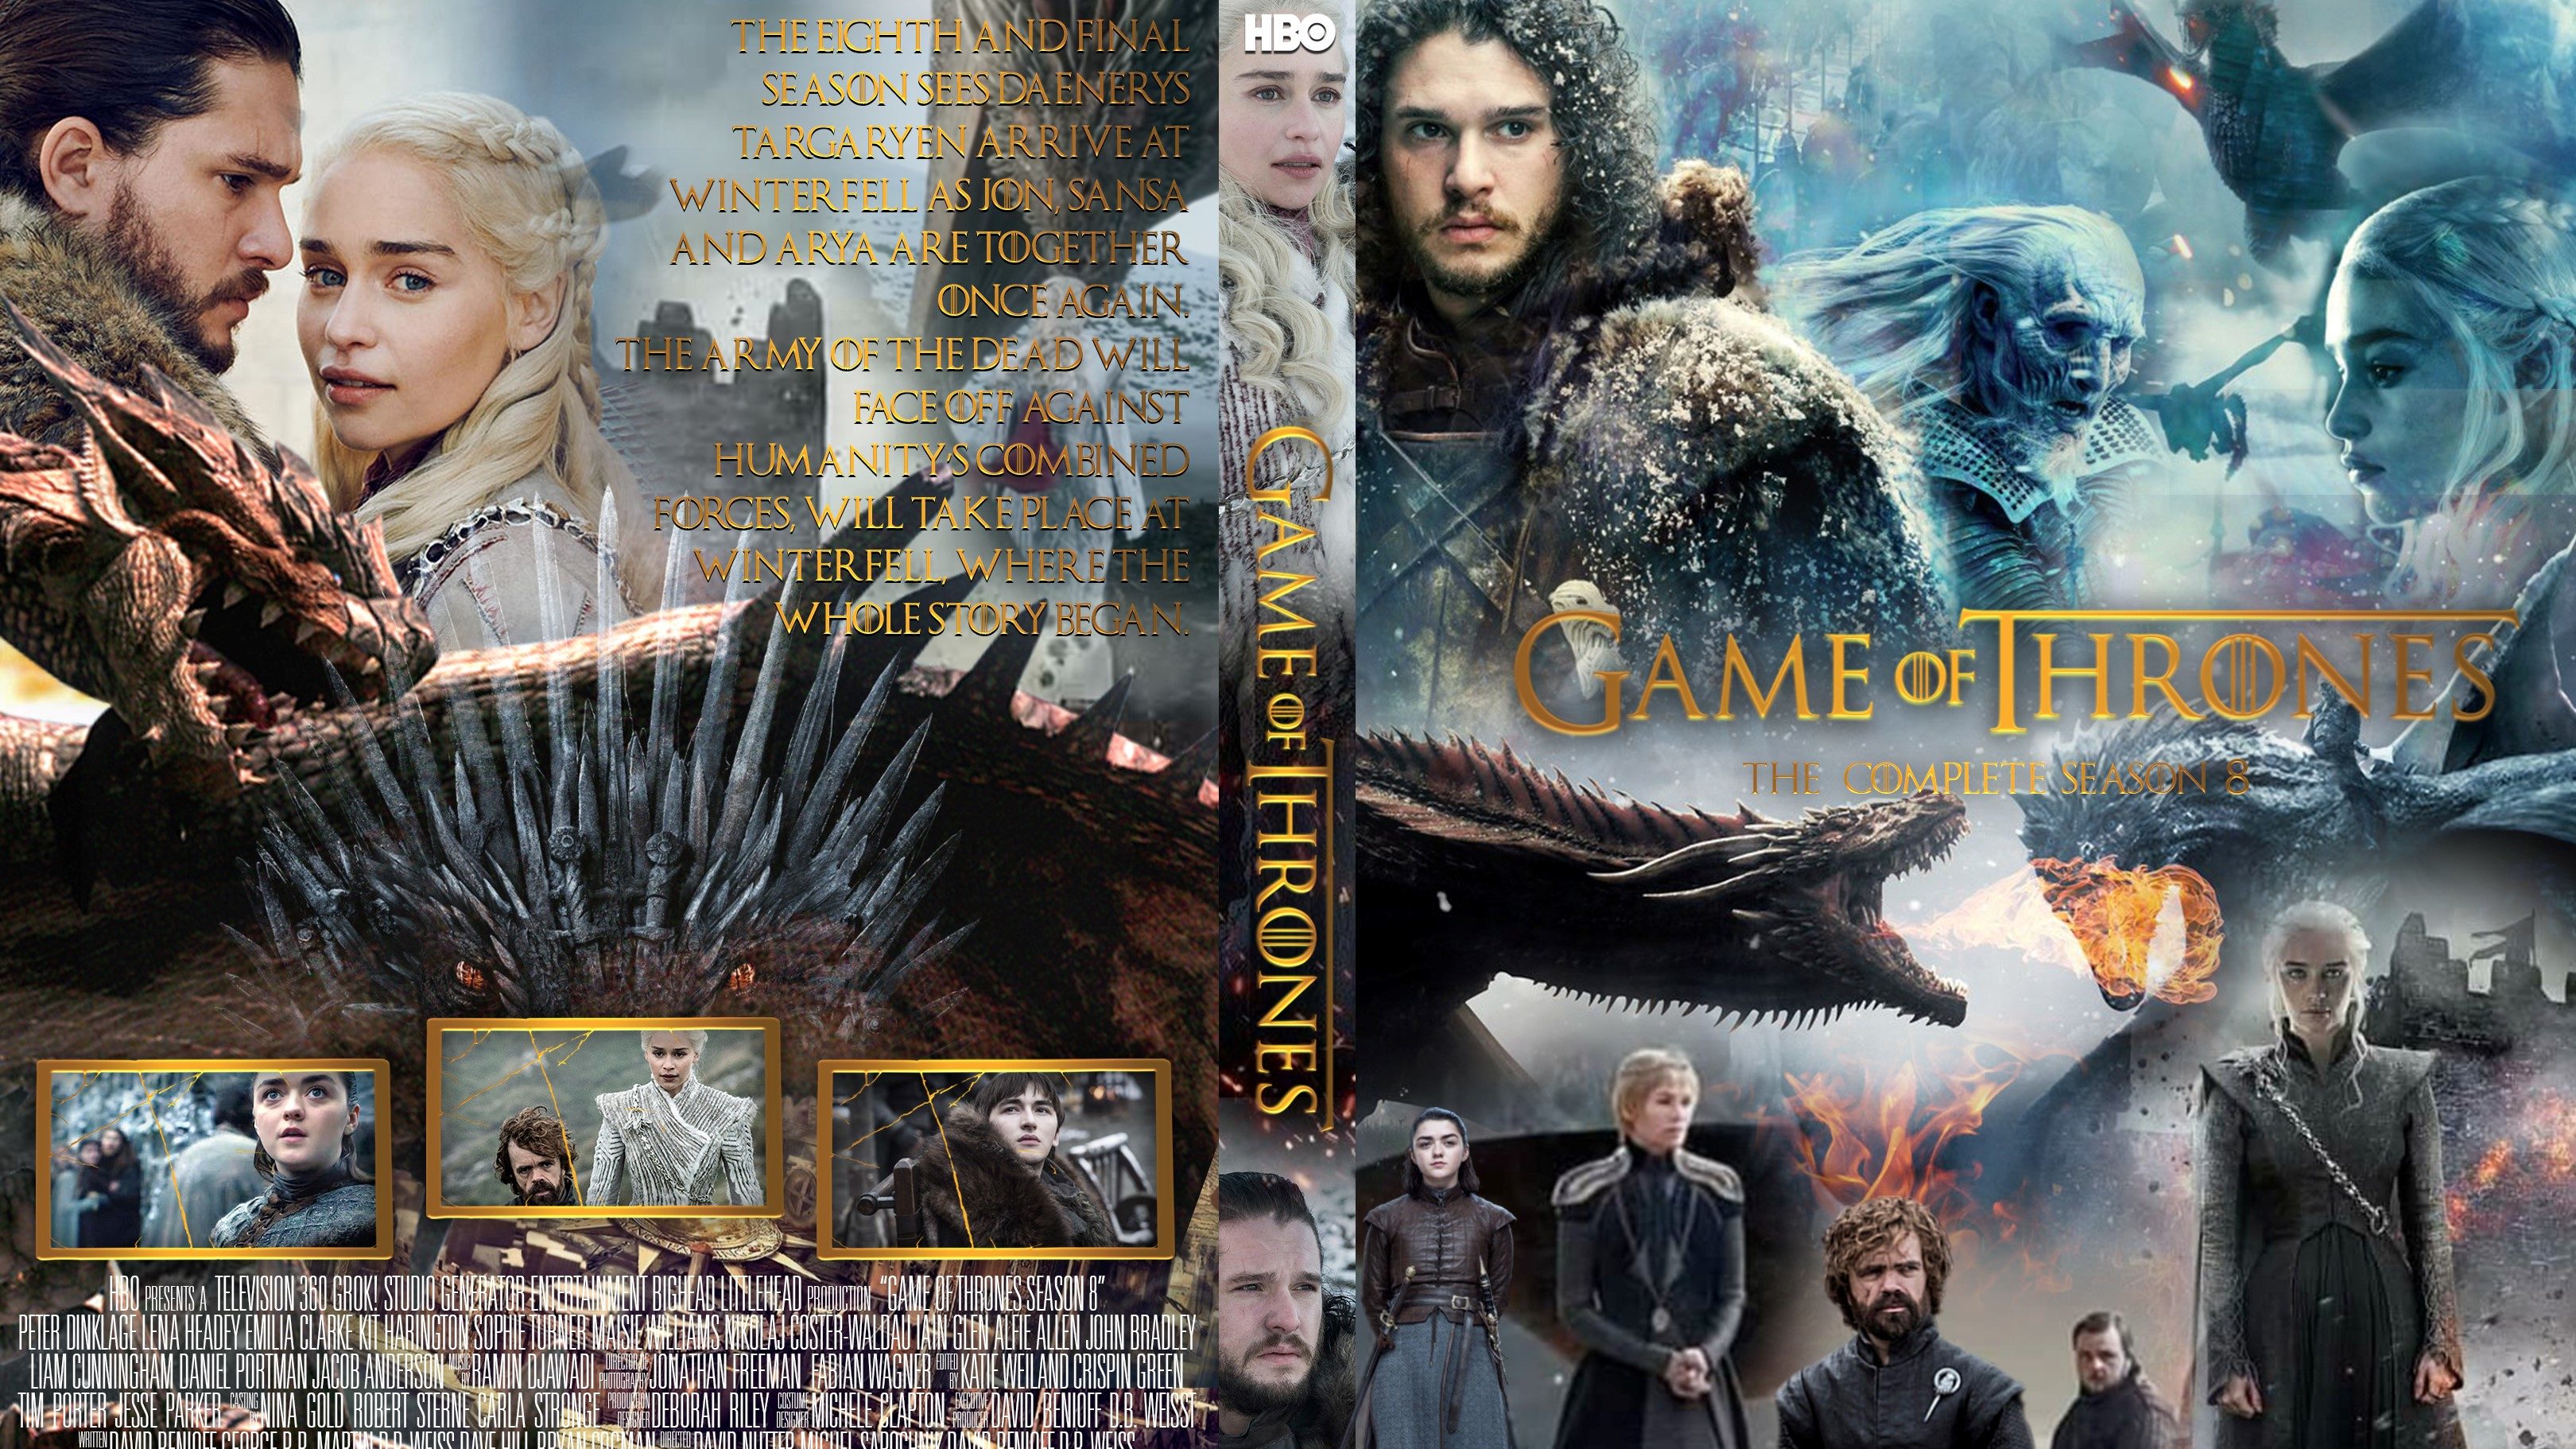 Game Of Thrones Season 8 DVD and Blu-ray release date